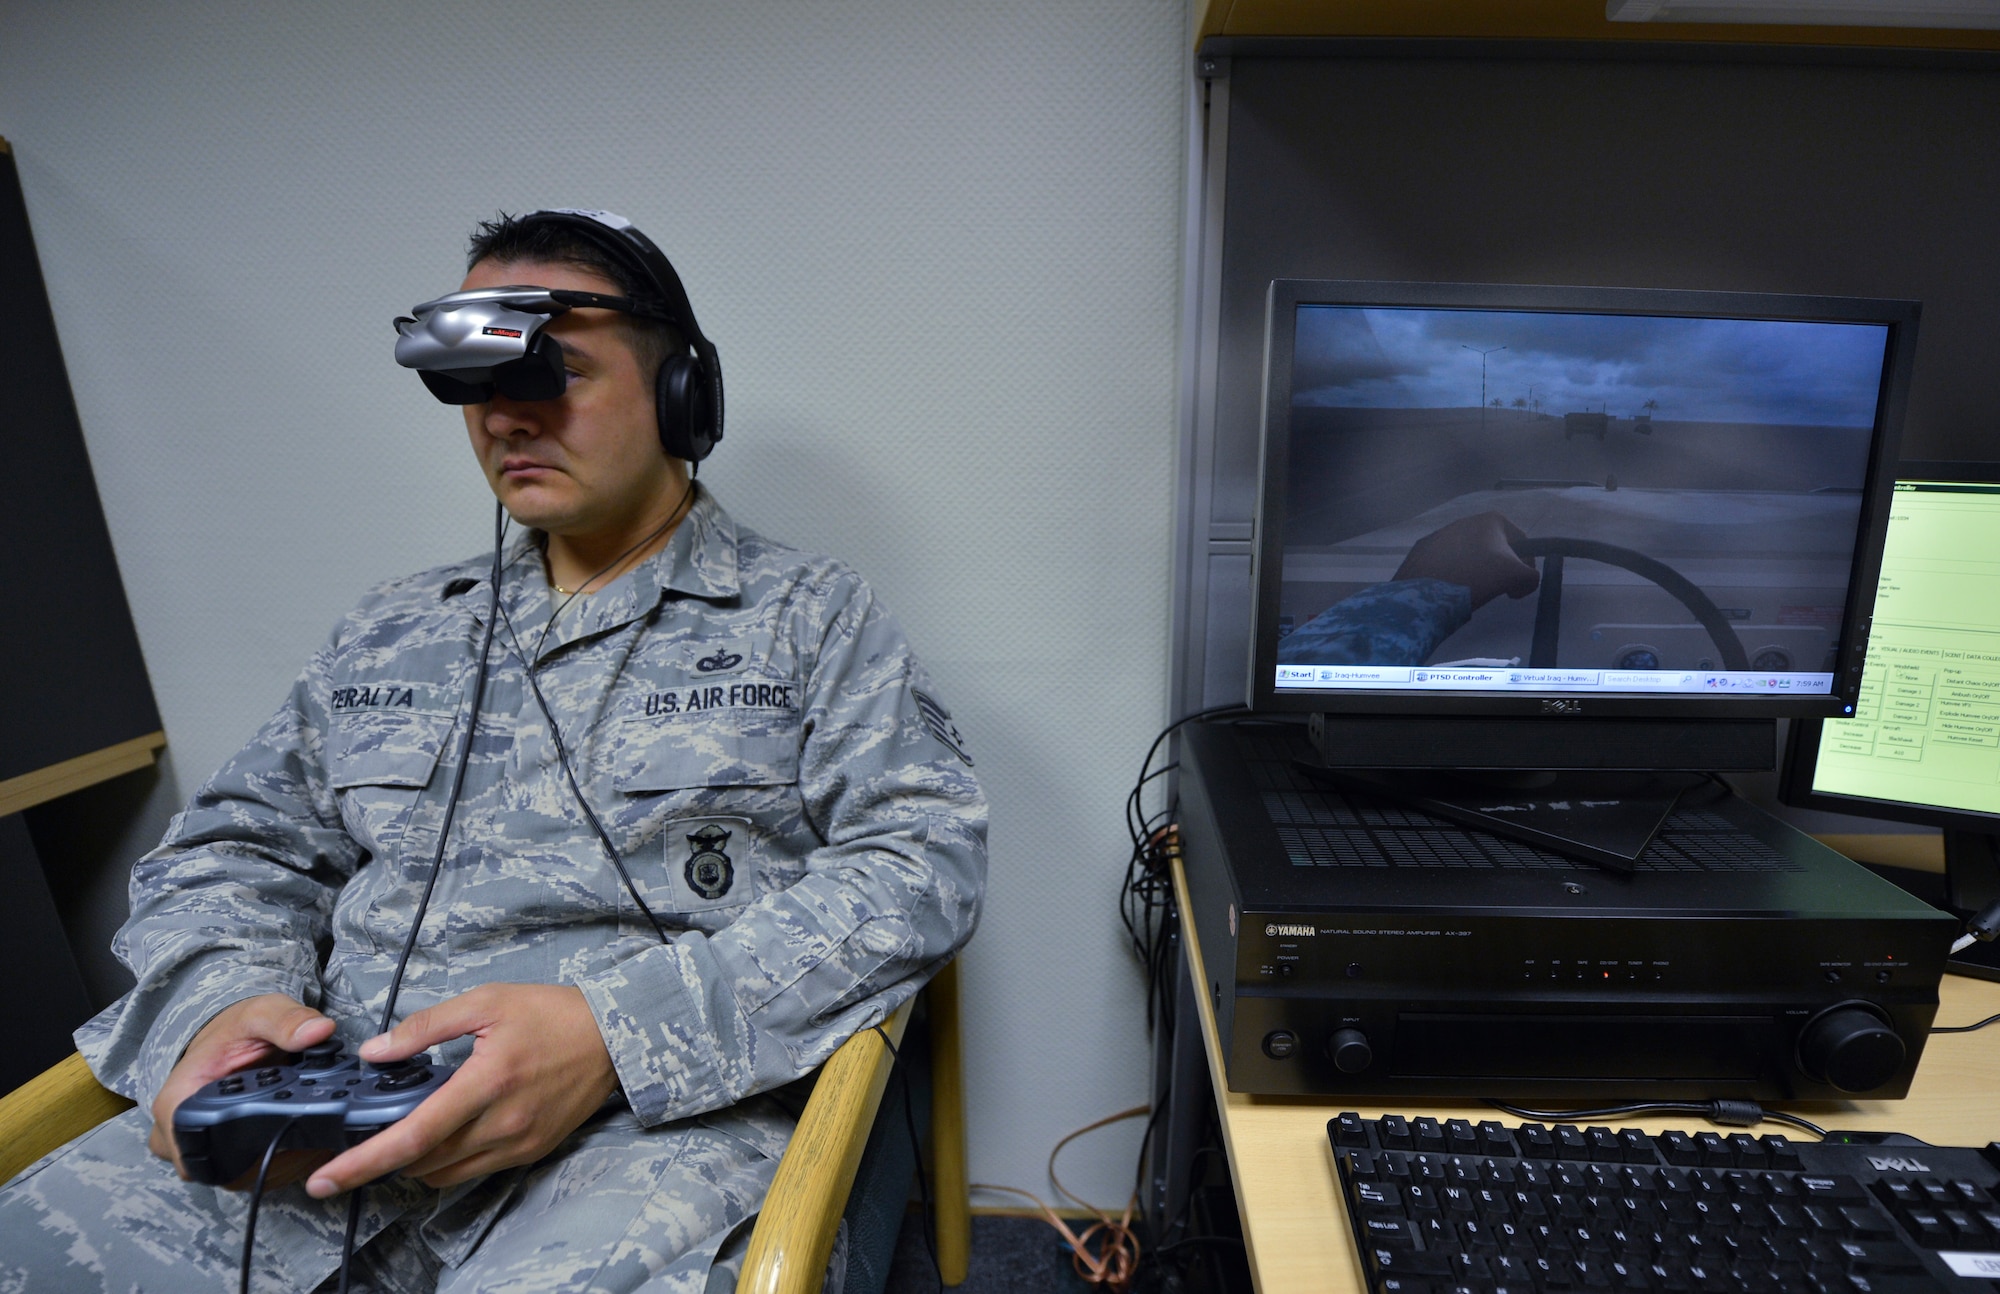 Air Force offers virtual reality therapy for those who suffer from PTSD > Air Force Medical Service >